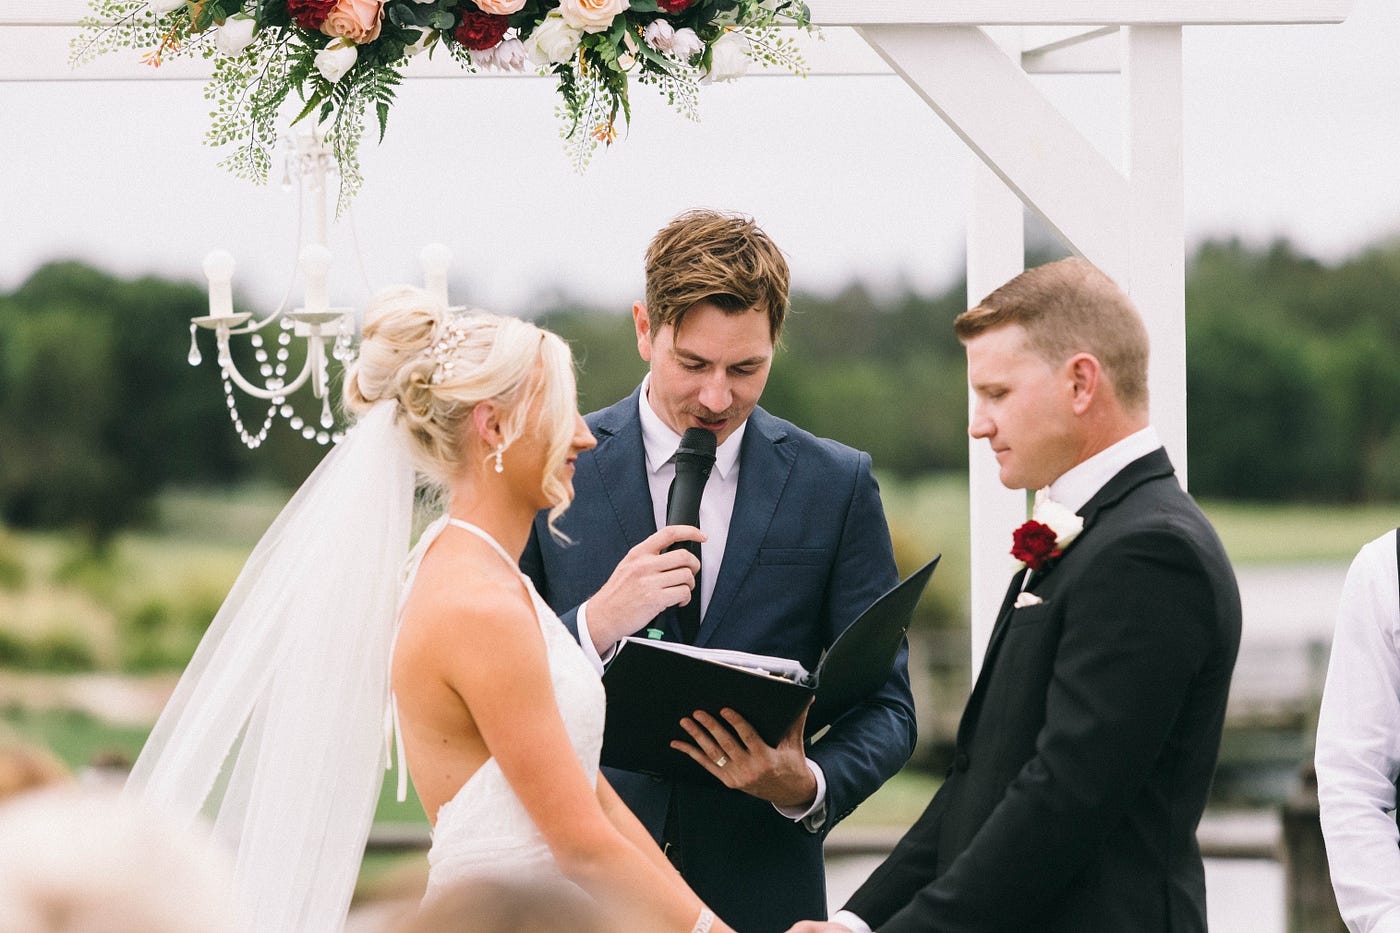 THINGS TO KNOW ABOUT A WEDDING CELEBRANT